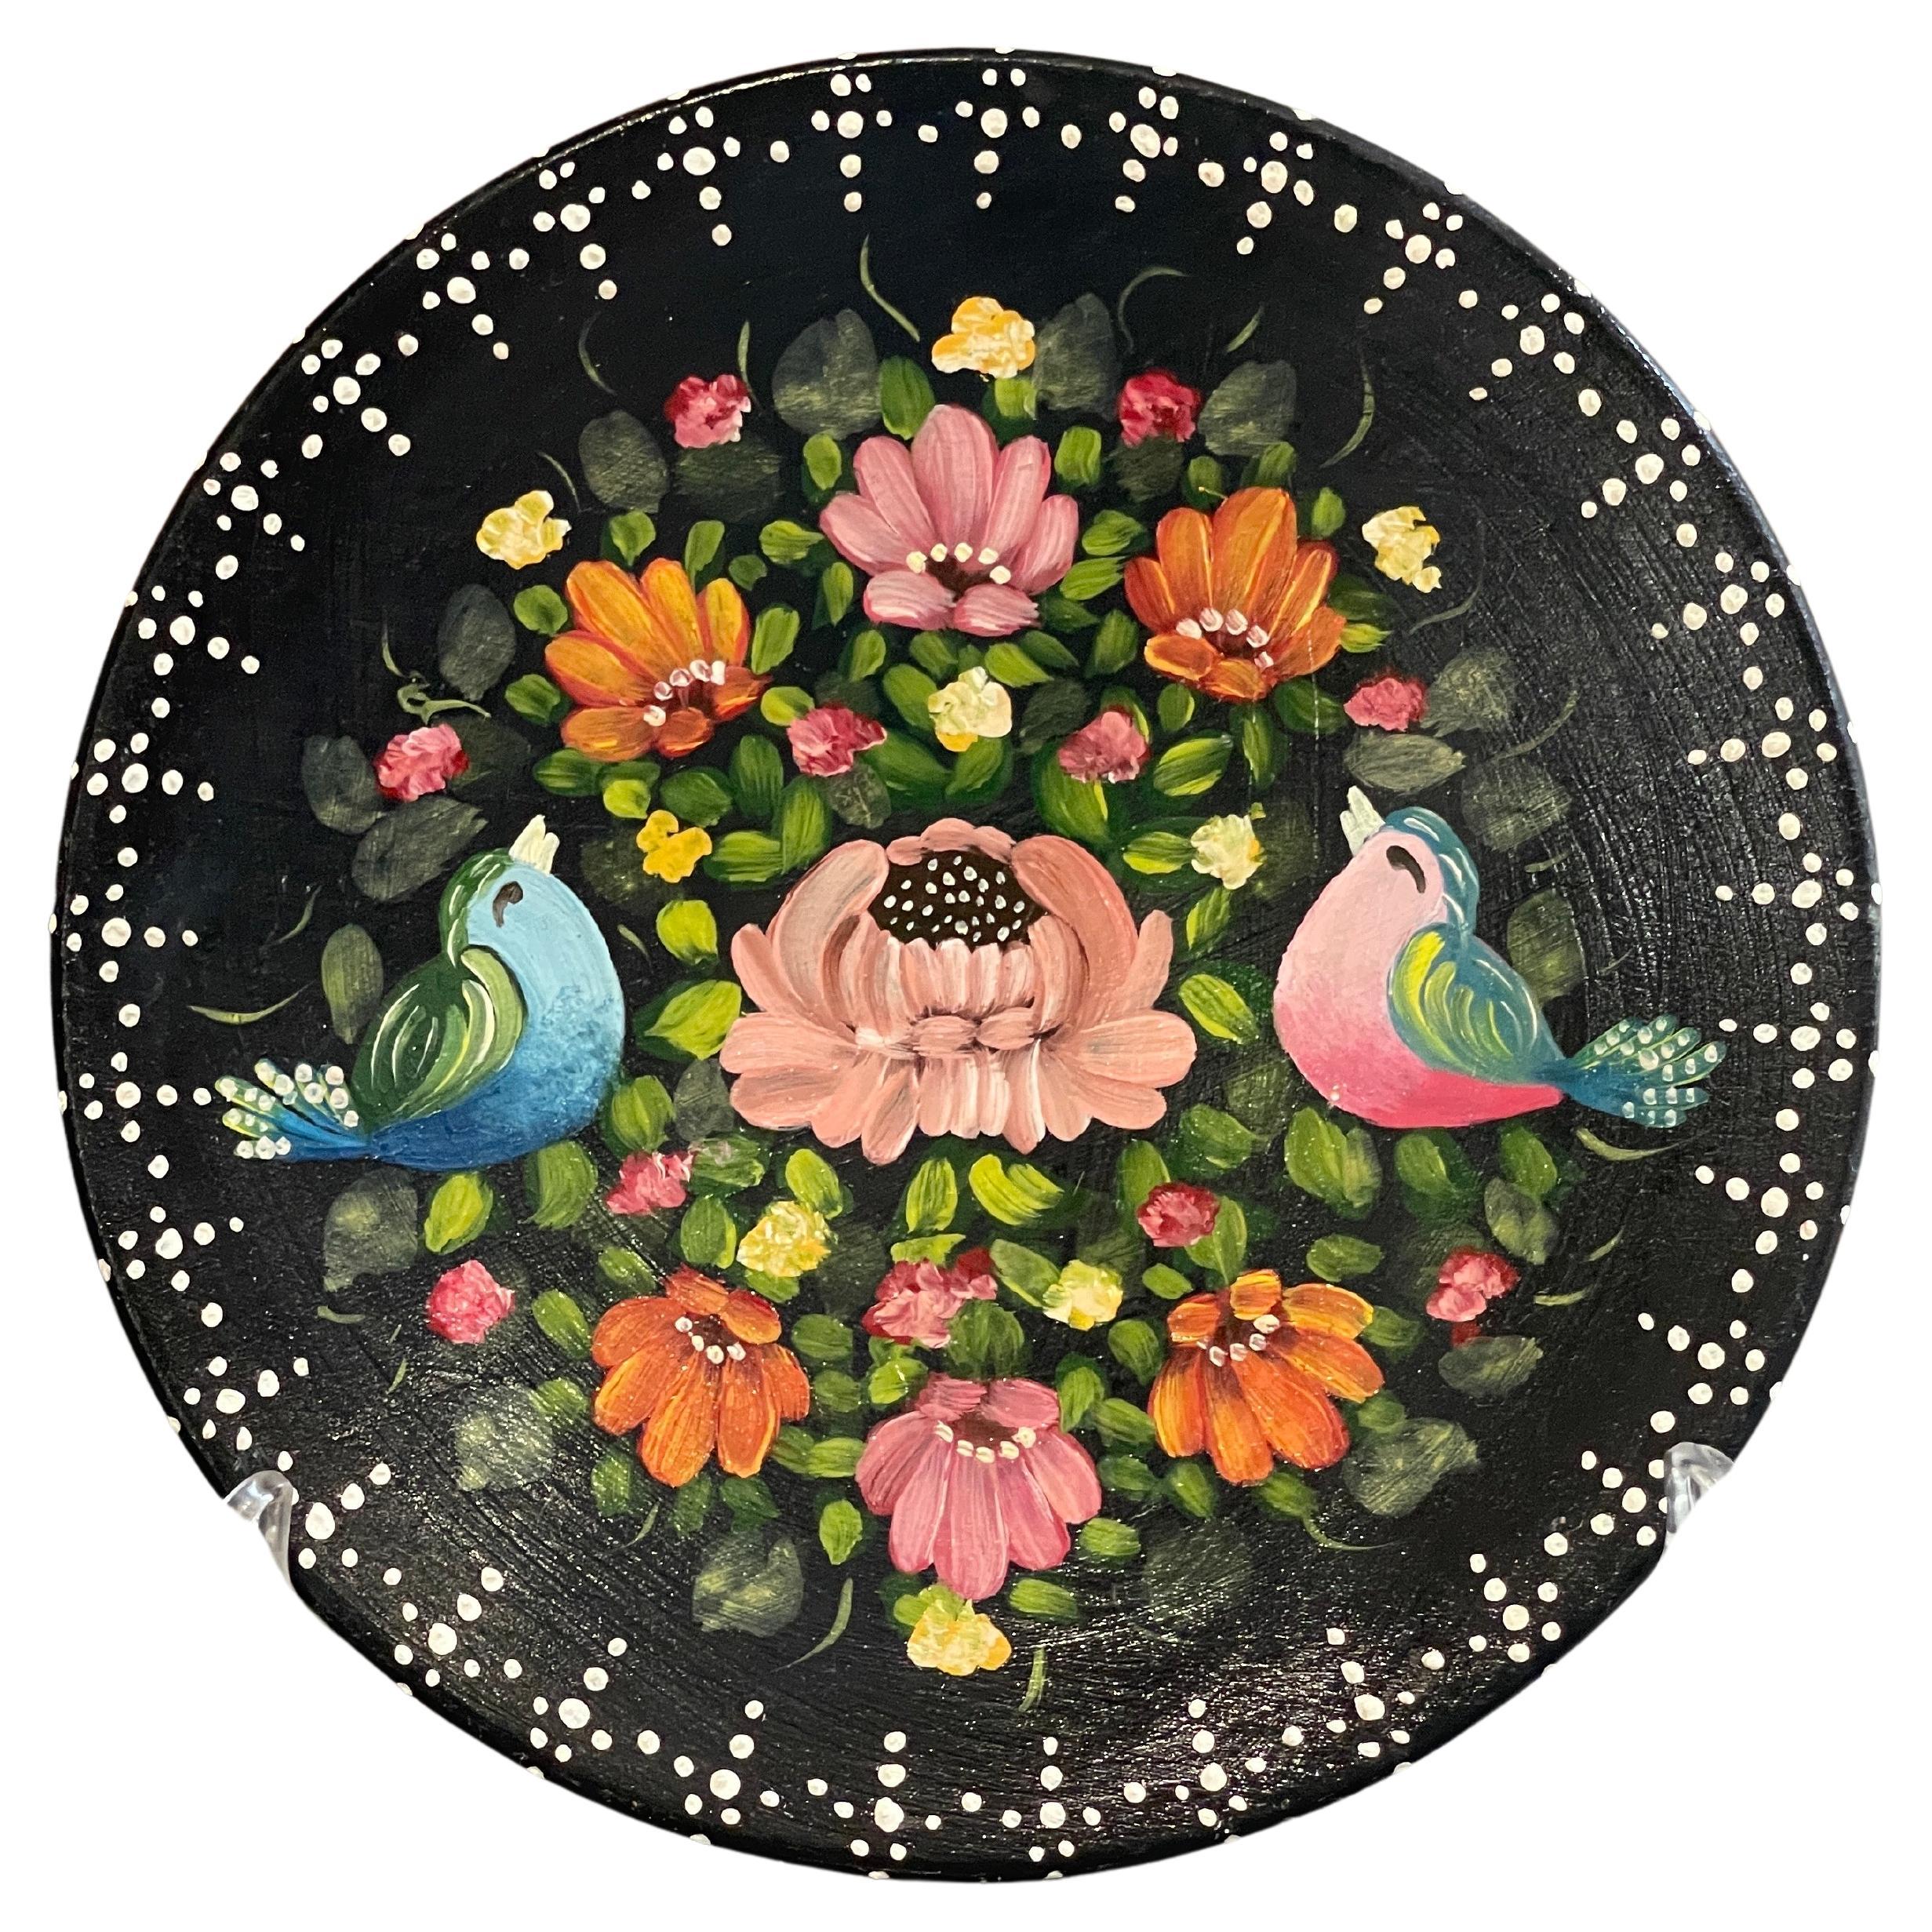 Vintage Hand Painted Plate, Decorative Ceramic Bird and Flower Wall Decoration